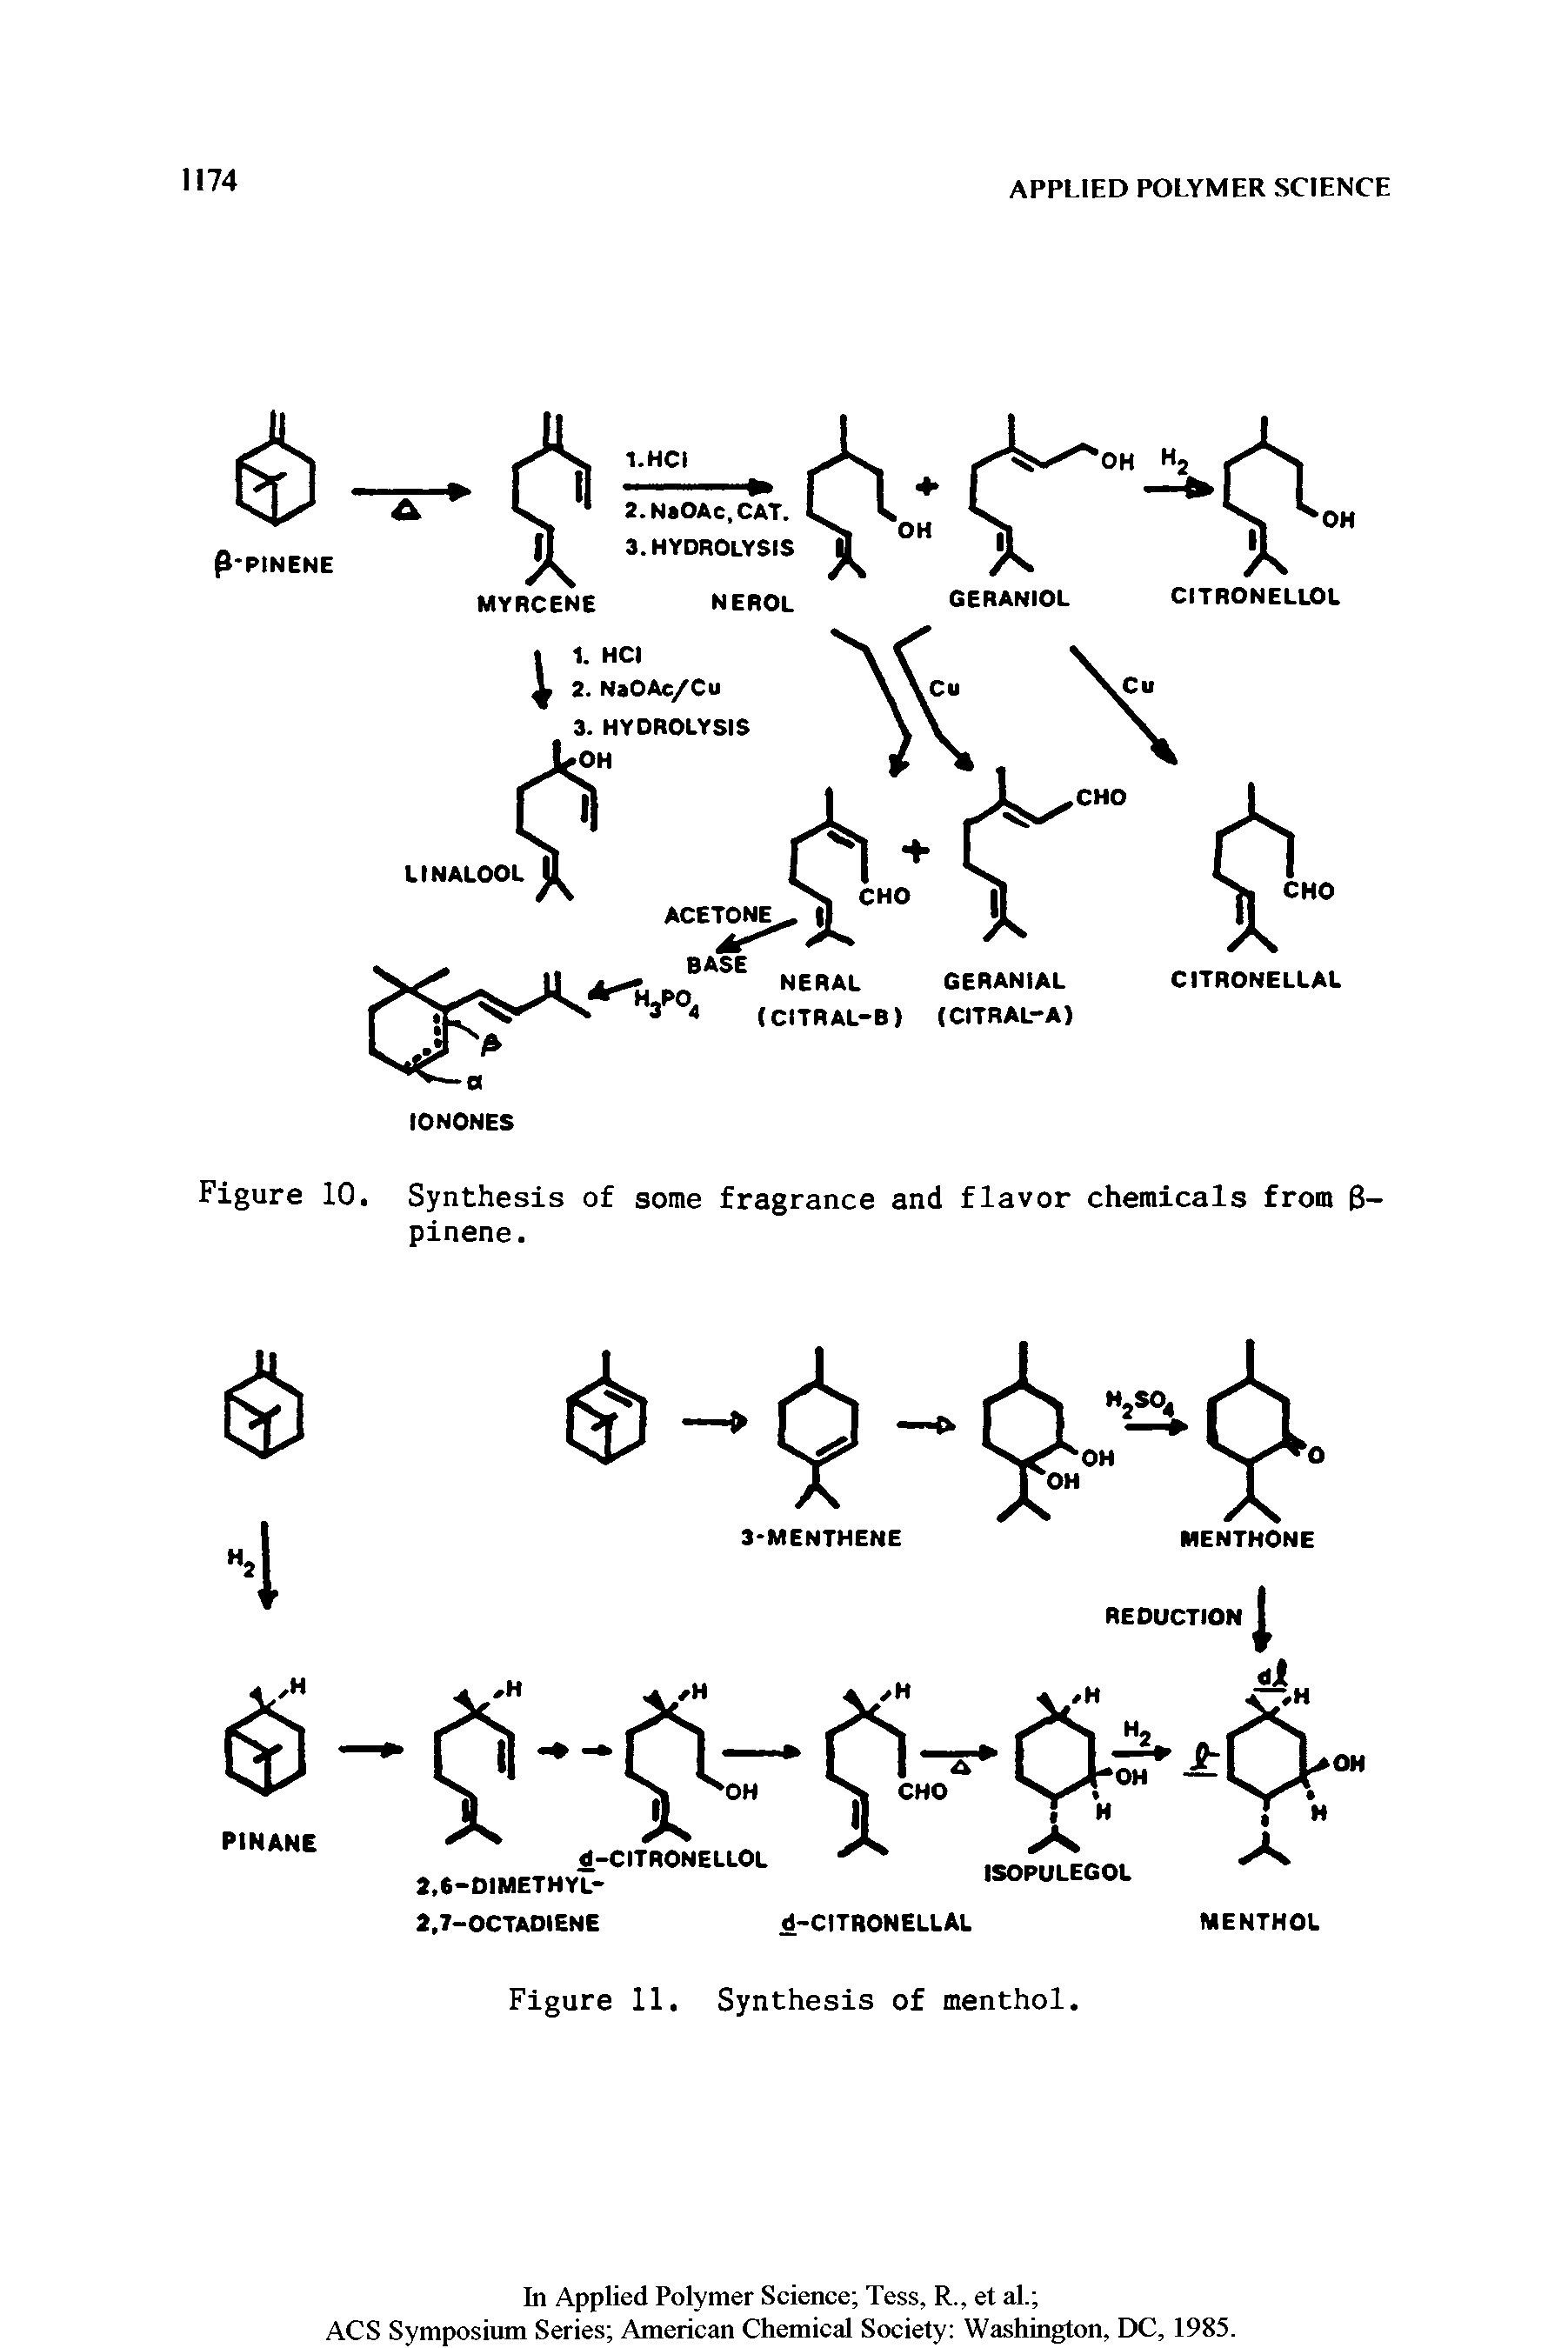 Figure 10. Synthesis of some fragrance and flavor chemicals from 6-pinene.